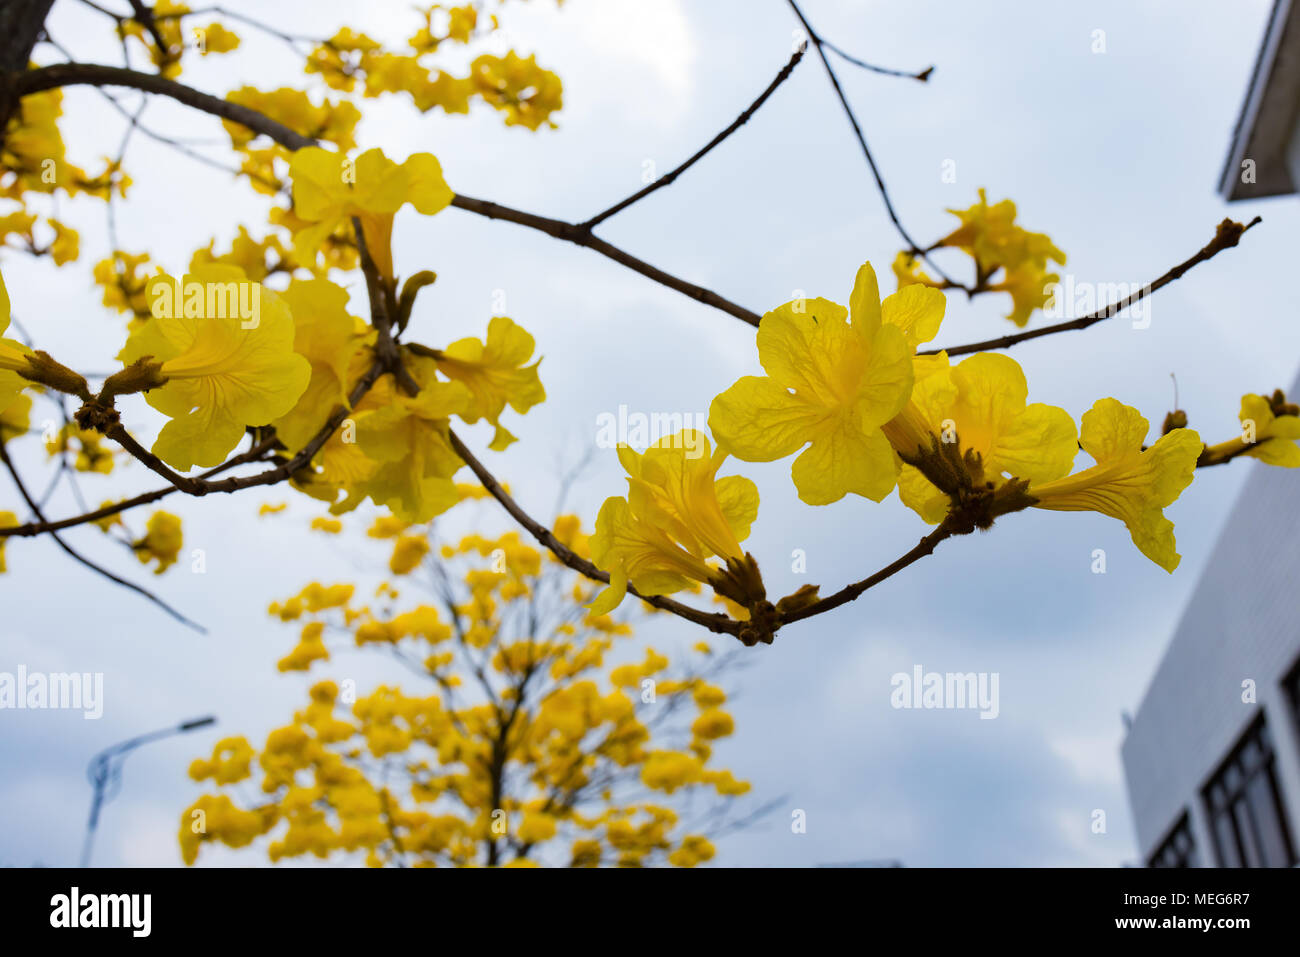 blooming Guayacan or Handroanthus chrysanthus tree Stock Photo